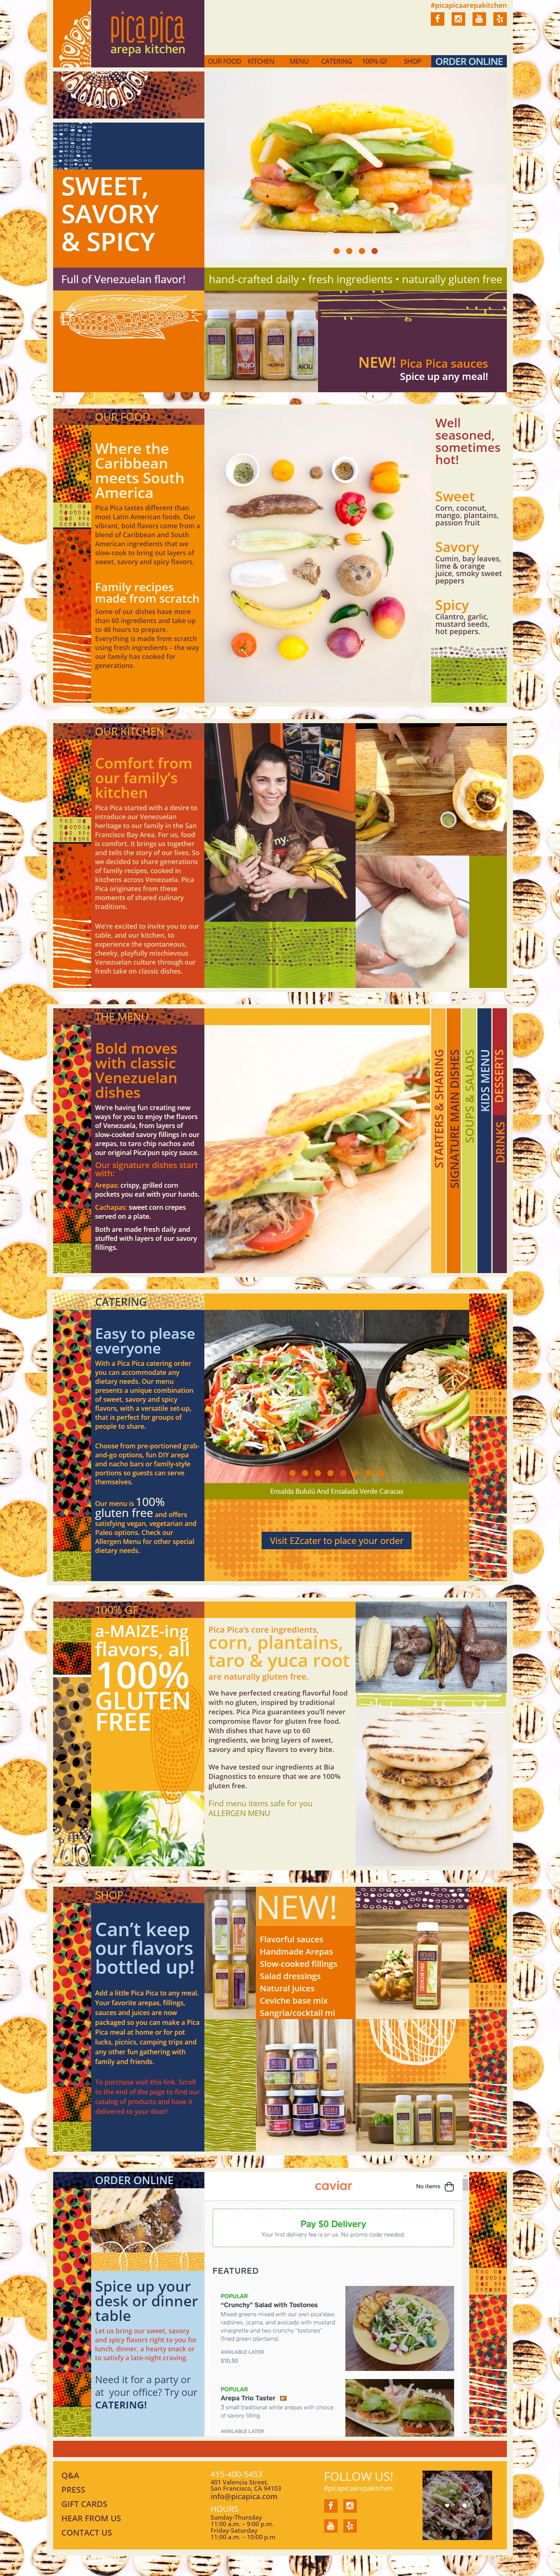 Pica Pica | Venezuelan food's website developed for Wordpress. 2019 update to a single infinite scroll page, responsive with bootstrap and sass